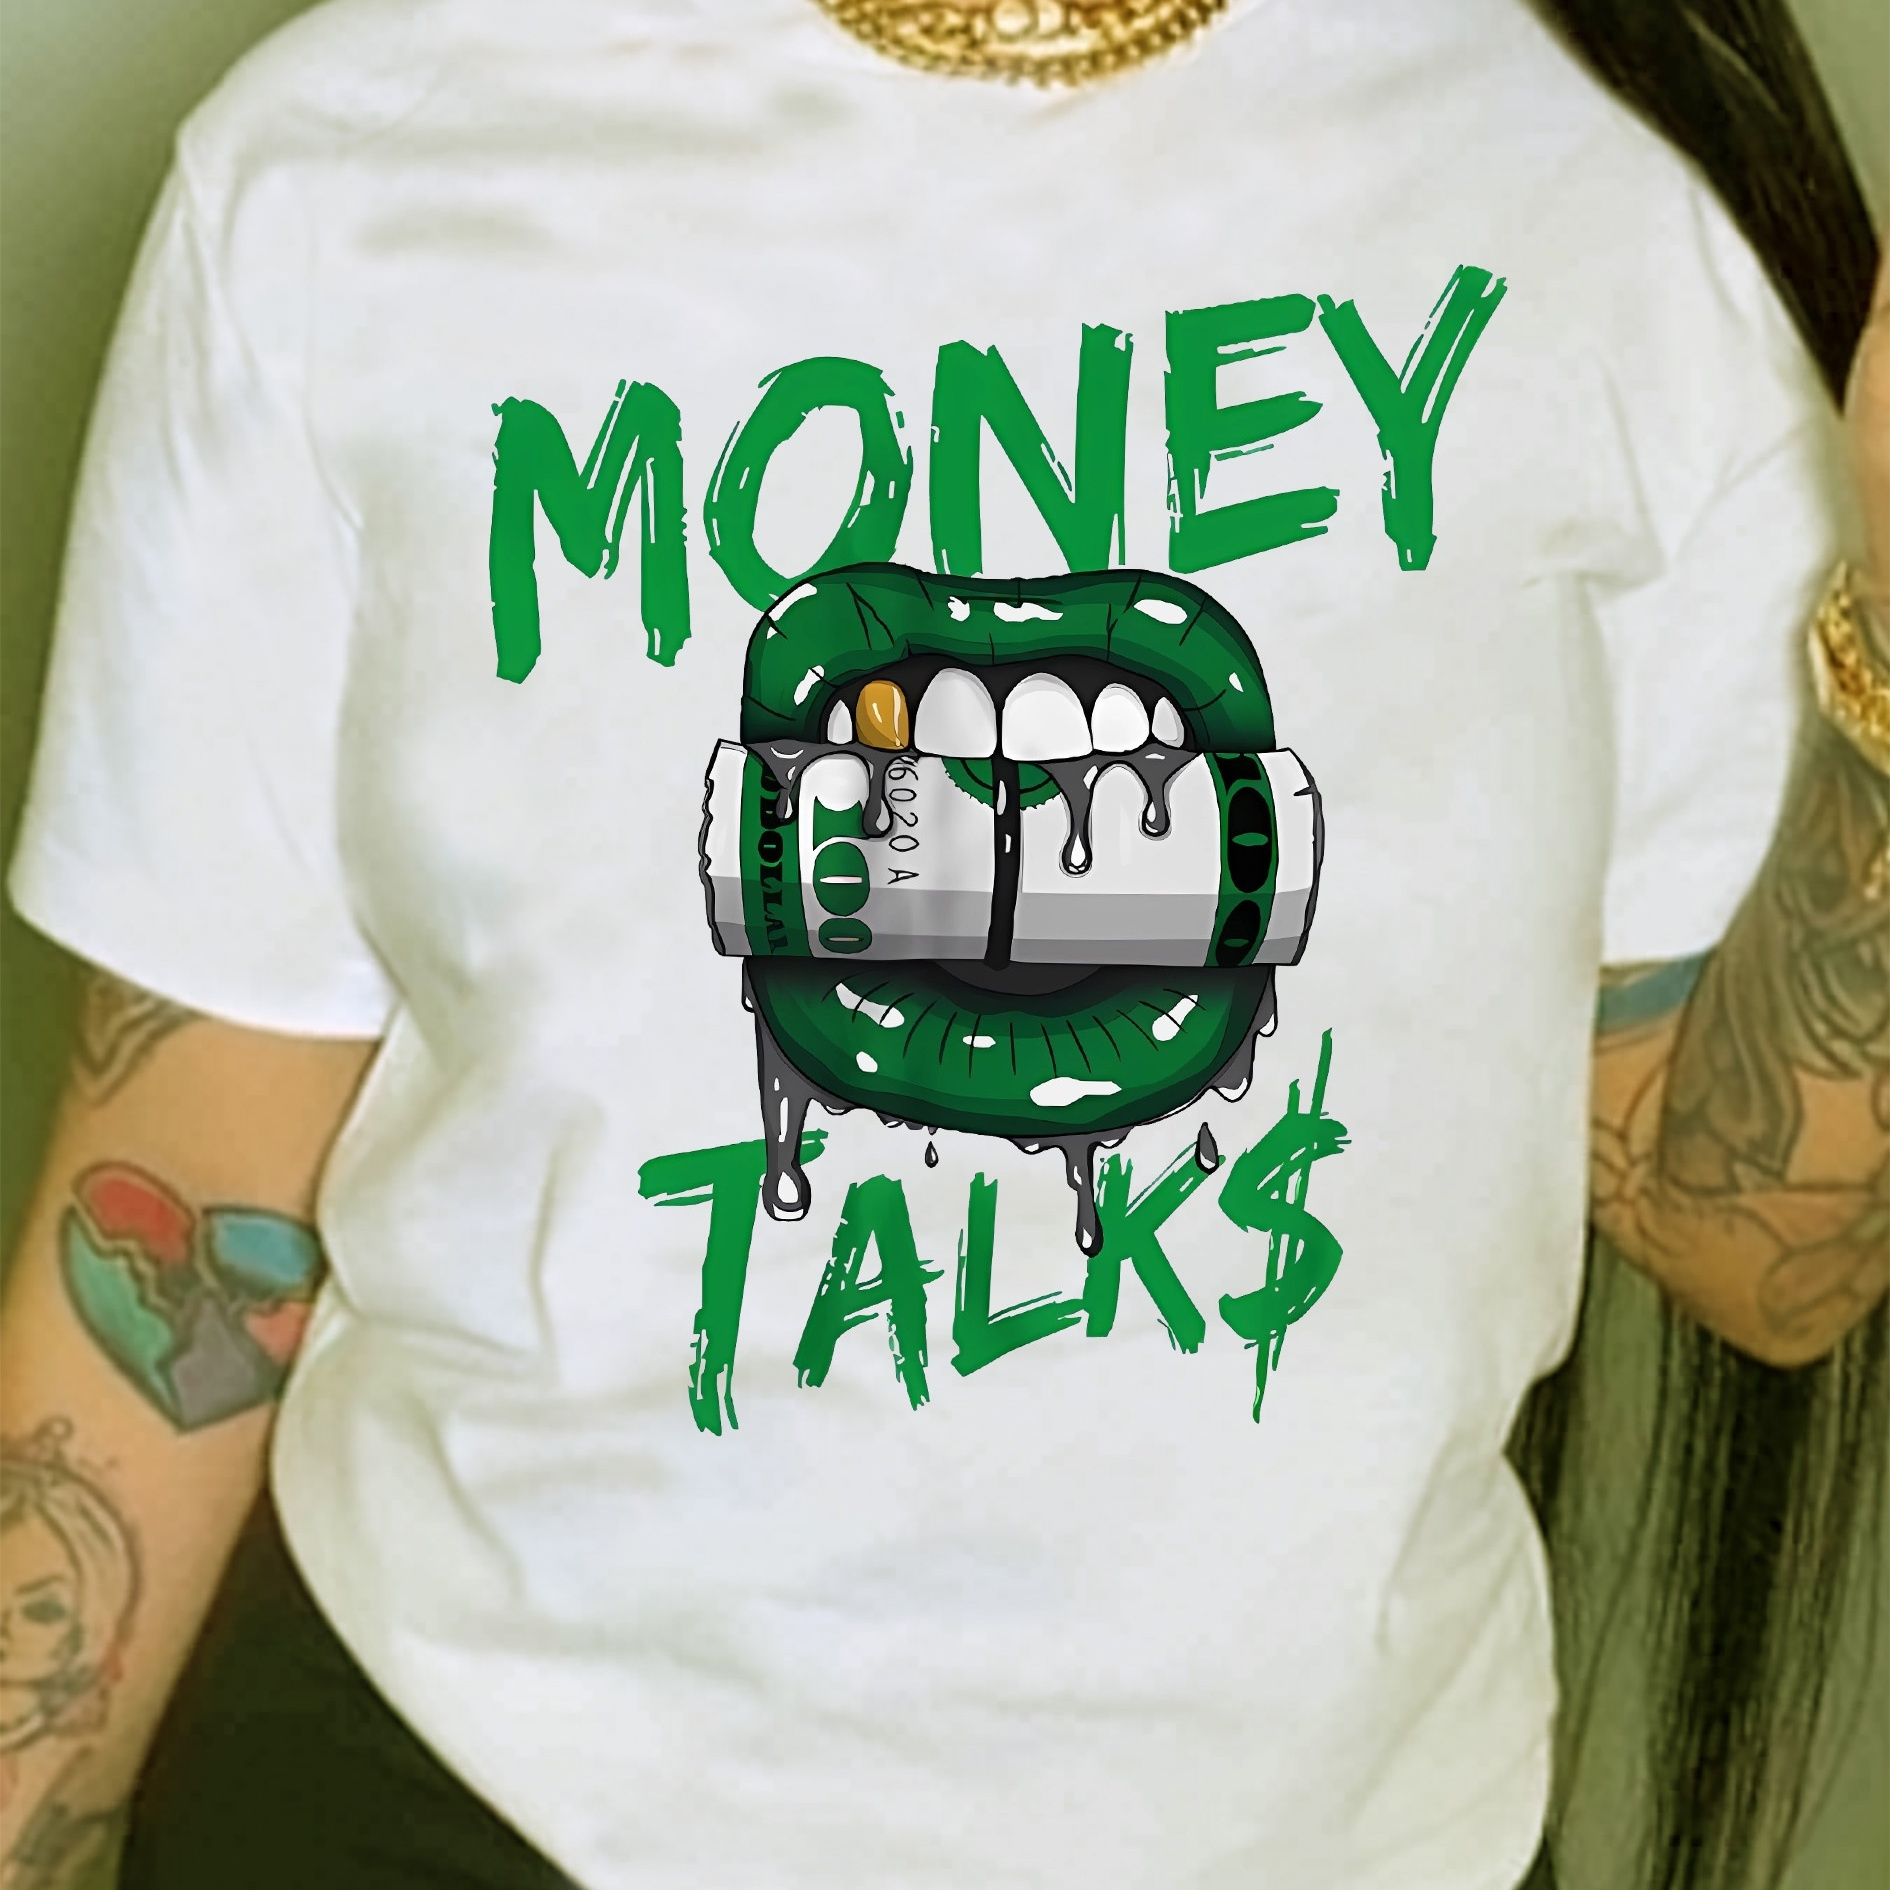 

Dollar & Mouth Print Crew Neck T-shirt, Casual Short Sleeve T-shirt For Spring & Summer, Women's Clothing